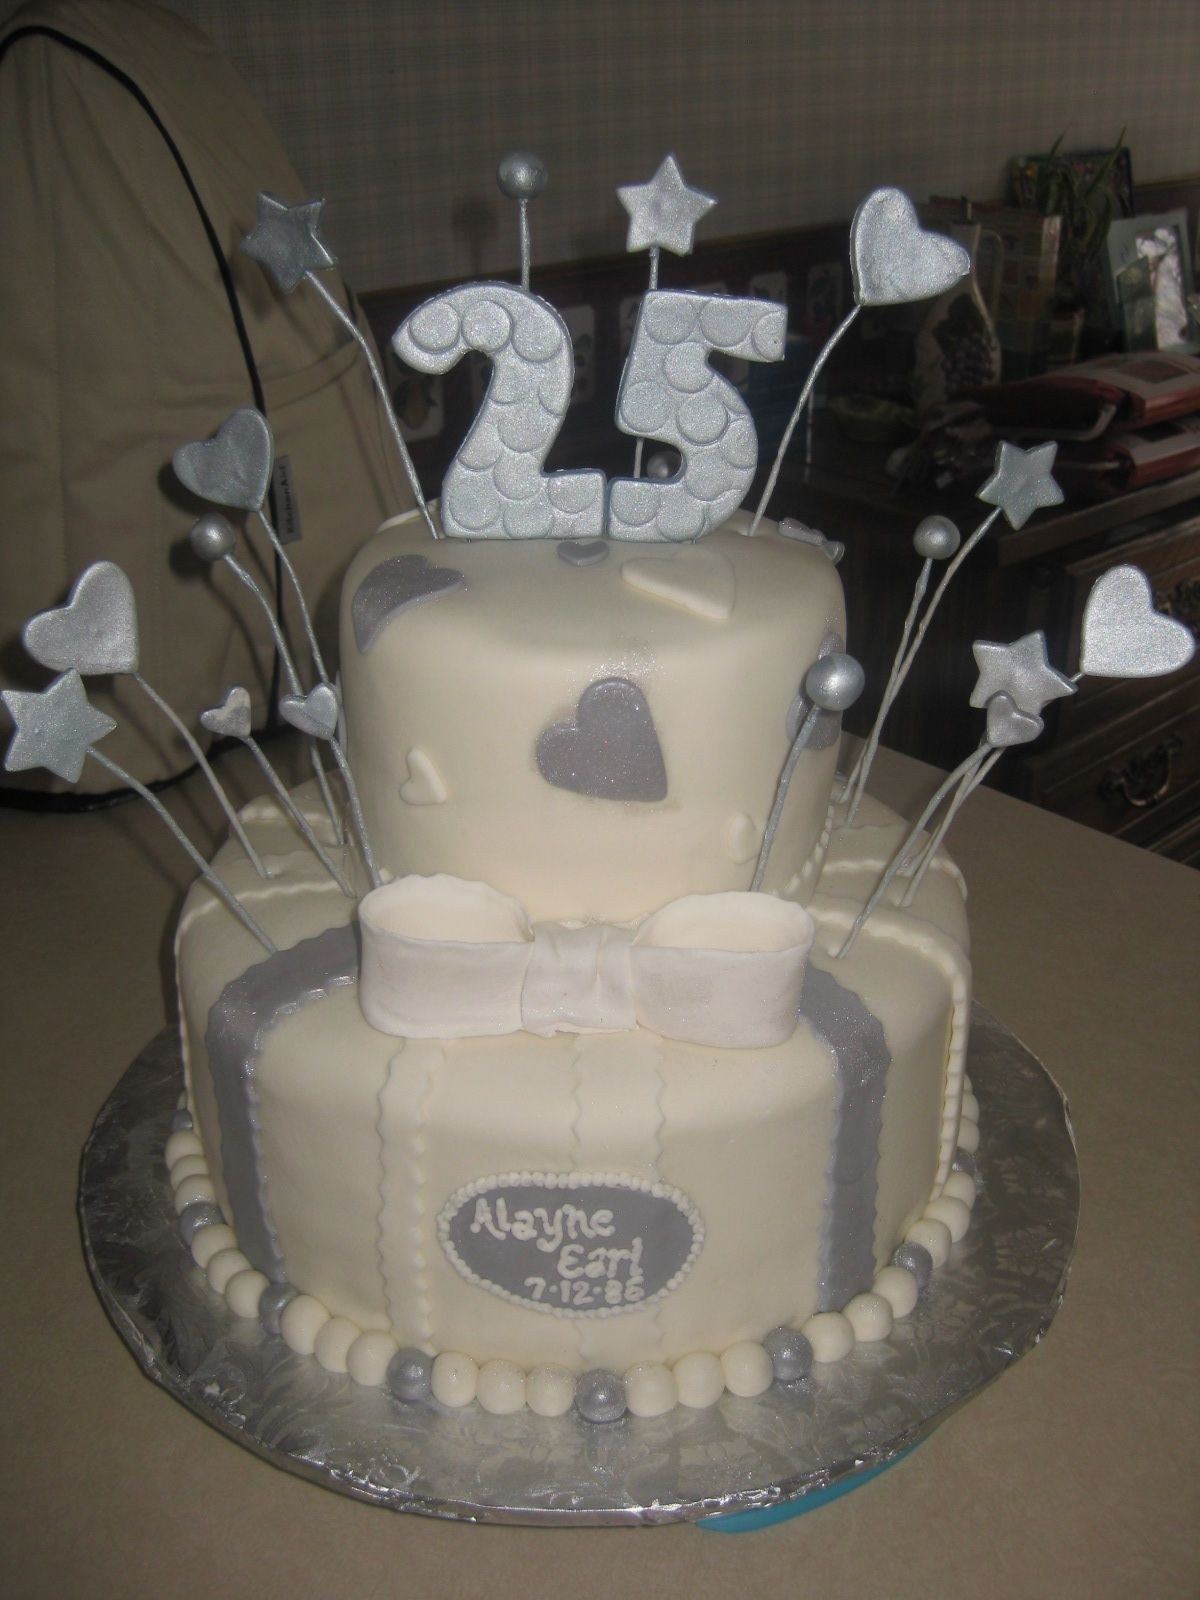 25th Wedding Anniversary Cakes
 25th Wedding Anniversary Cake A Day to remember